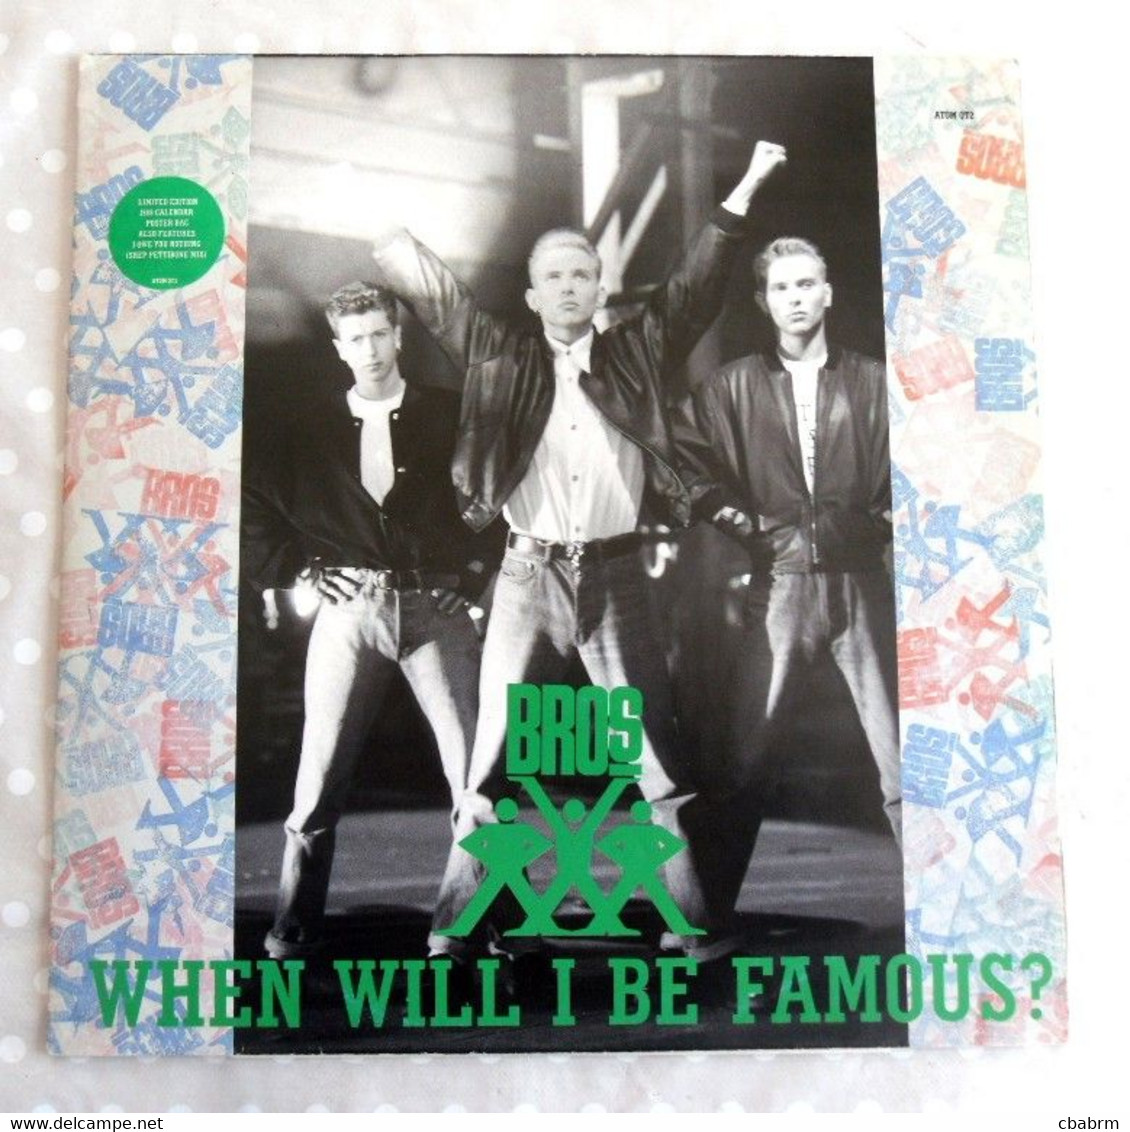 MAXI 45 TOURS BROS WHEN WILL I BE FAMOUS LIMITED EDITION POCHETTE CALENDRIER 12" - 45 T - Maxi-Single